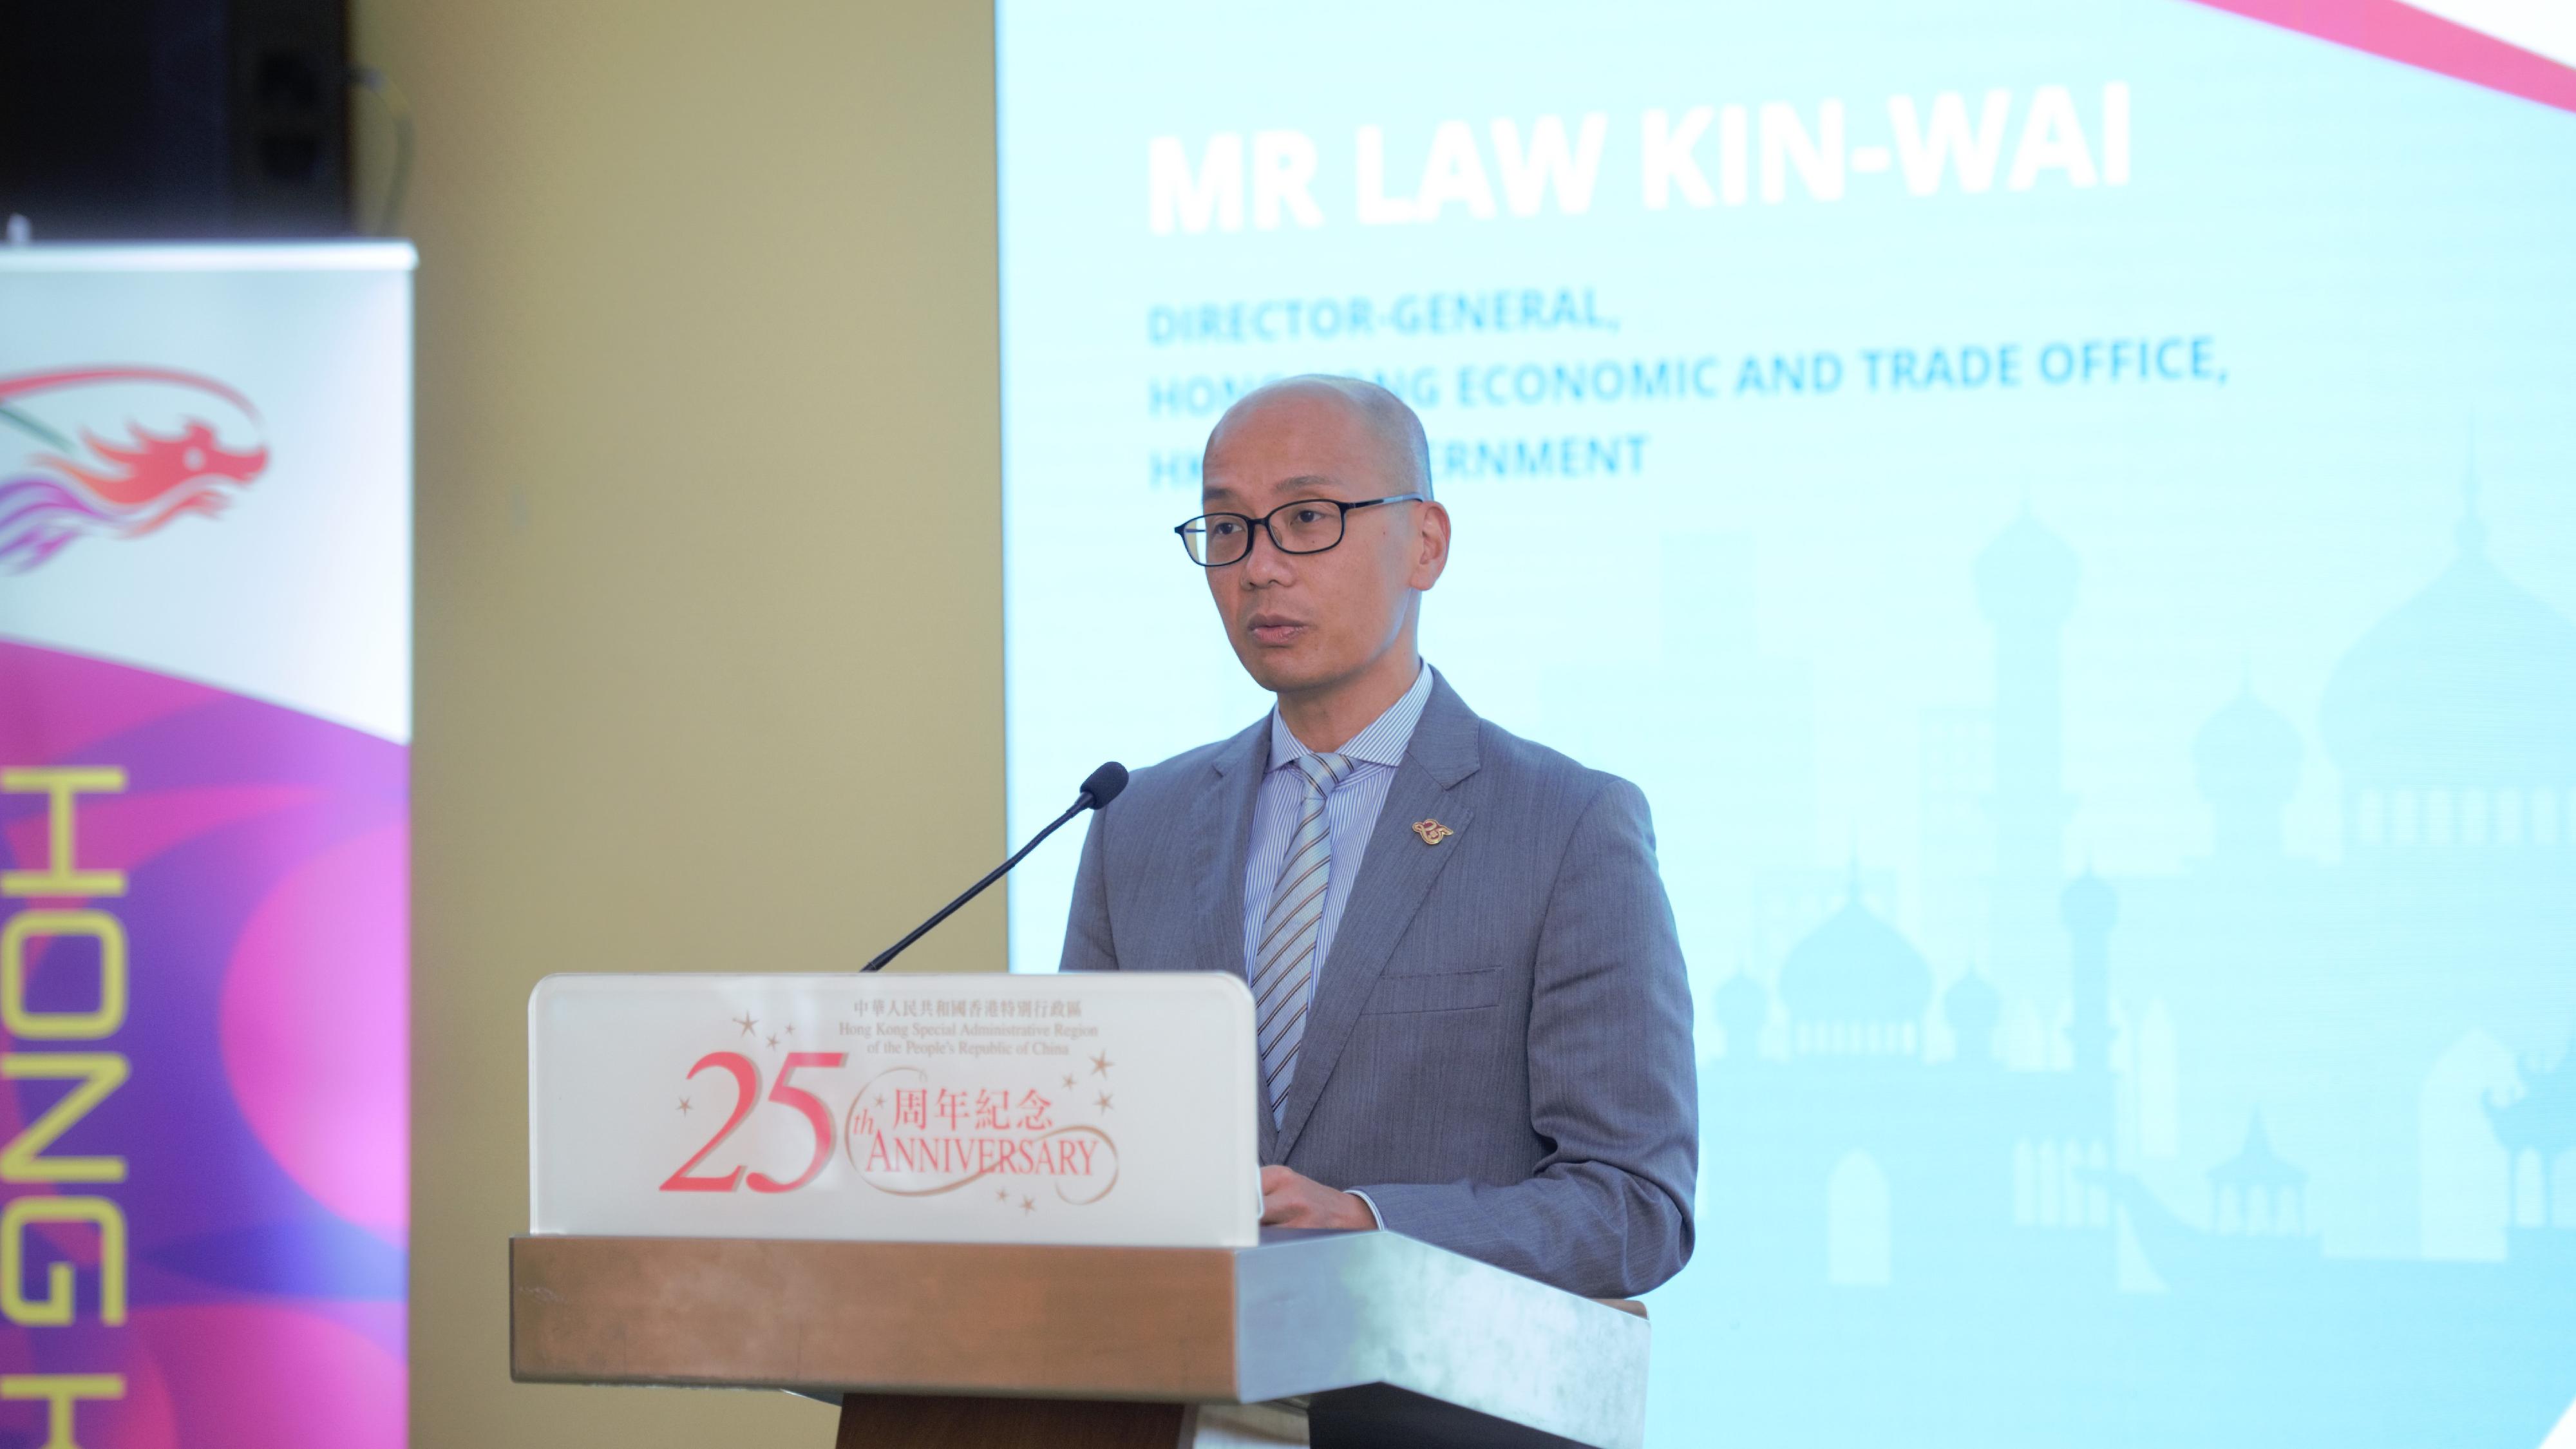 The Hong Kong Economic and Trade Office, Jakarta (HKETO Jakarta) today (August 18) held a luncheon in Bandar Seri Begawan to celebrate the 25th anniversary of the establishment of the Hong Kong Special Administrative Region. Photo shows the Director-General of the HKETO Jakarta, Mr Law Kin-wai, delivering a welcoming speech at the luncheon.